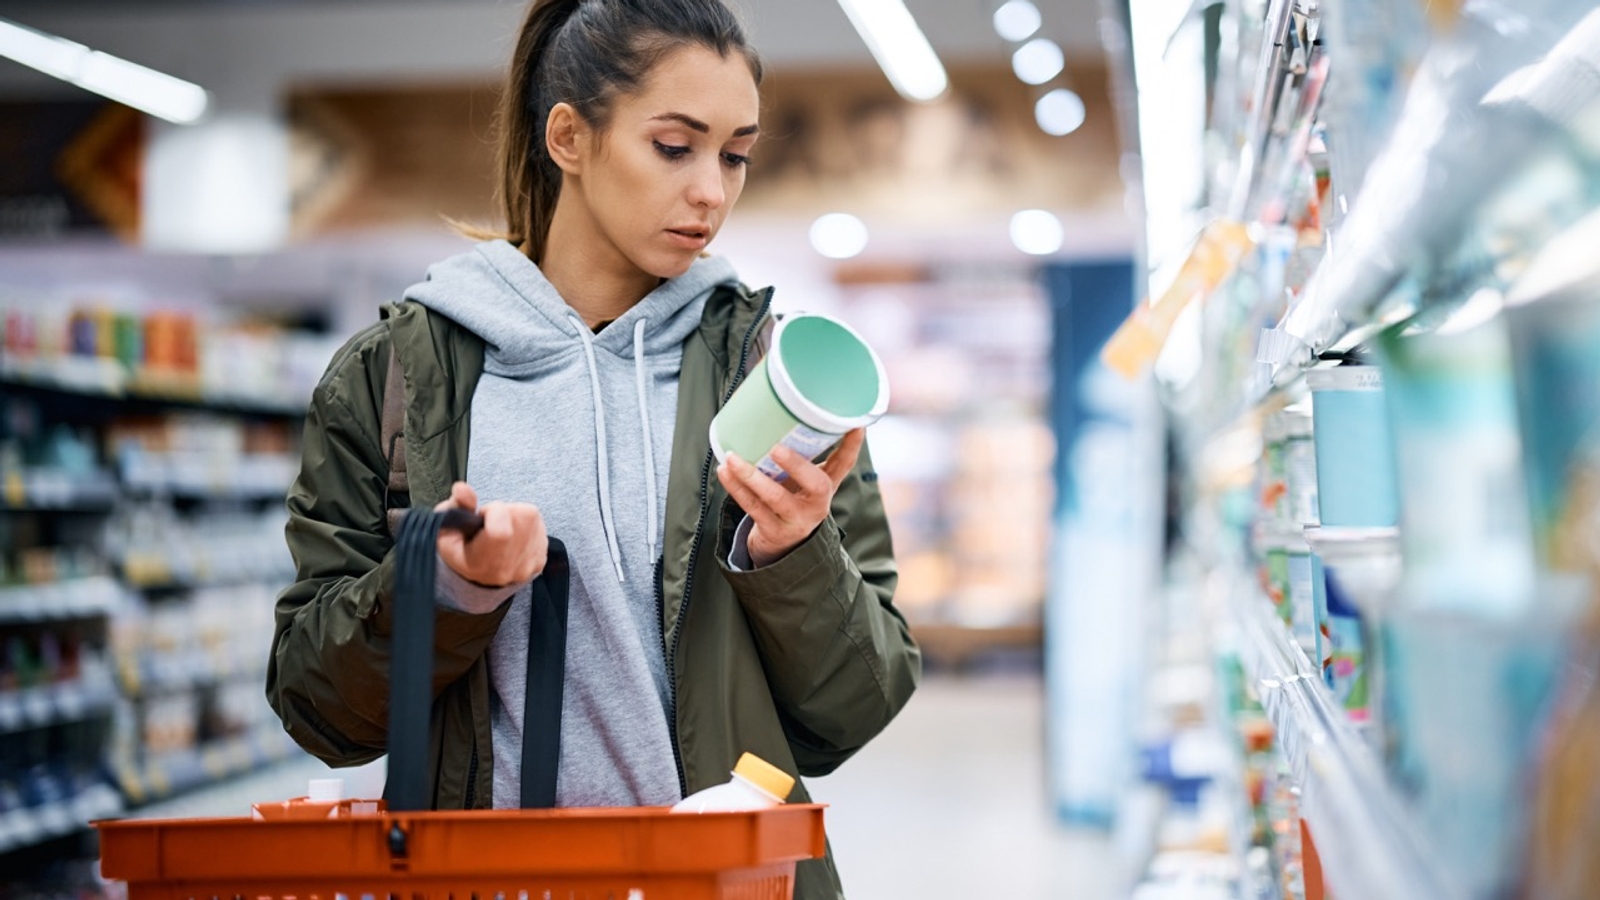 Woman checking label on carton of food at supermarket